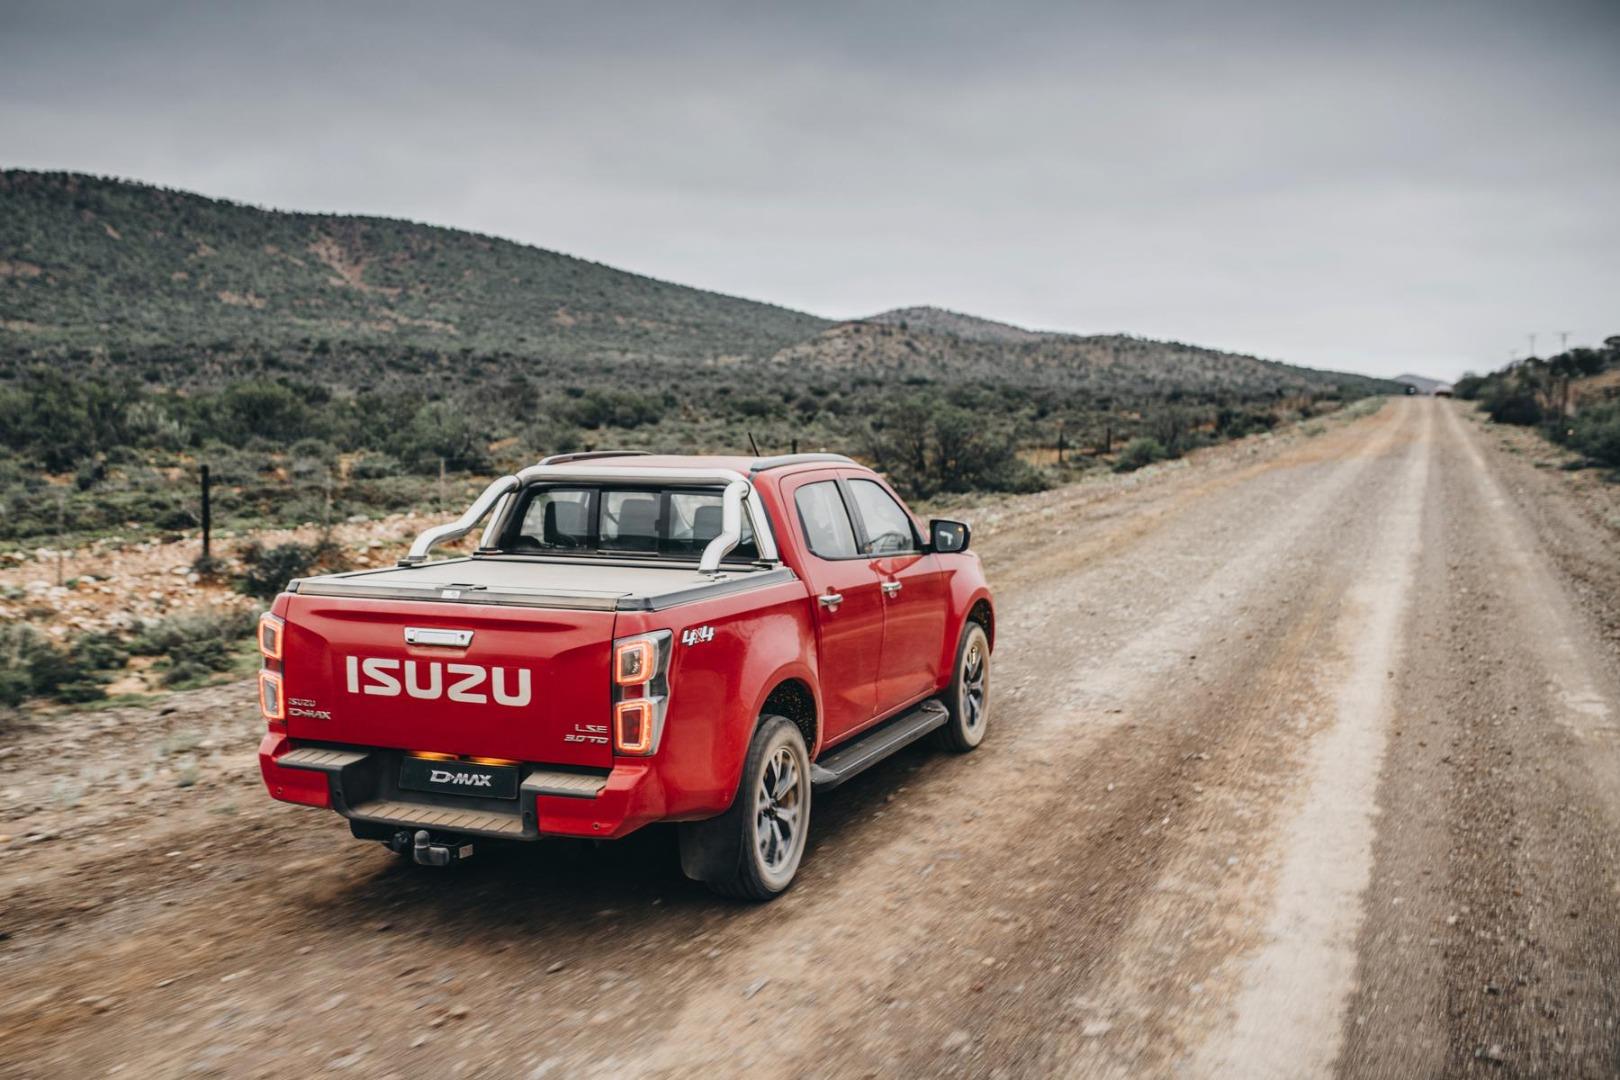 toyota hilux vs ford ranger vs isuzu d-max: which one has the lowest running costs?